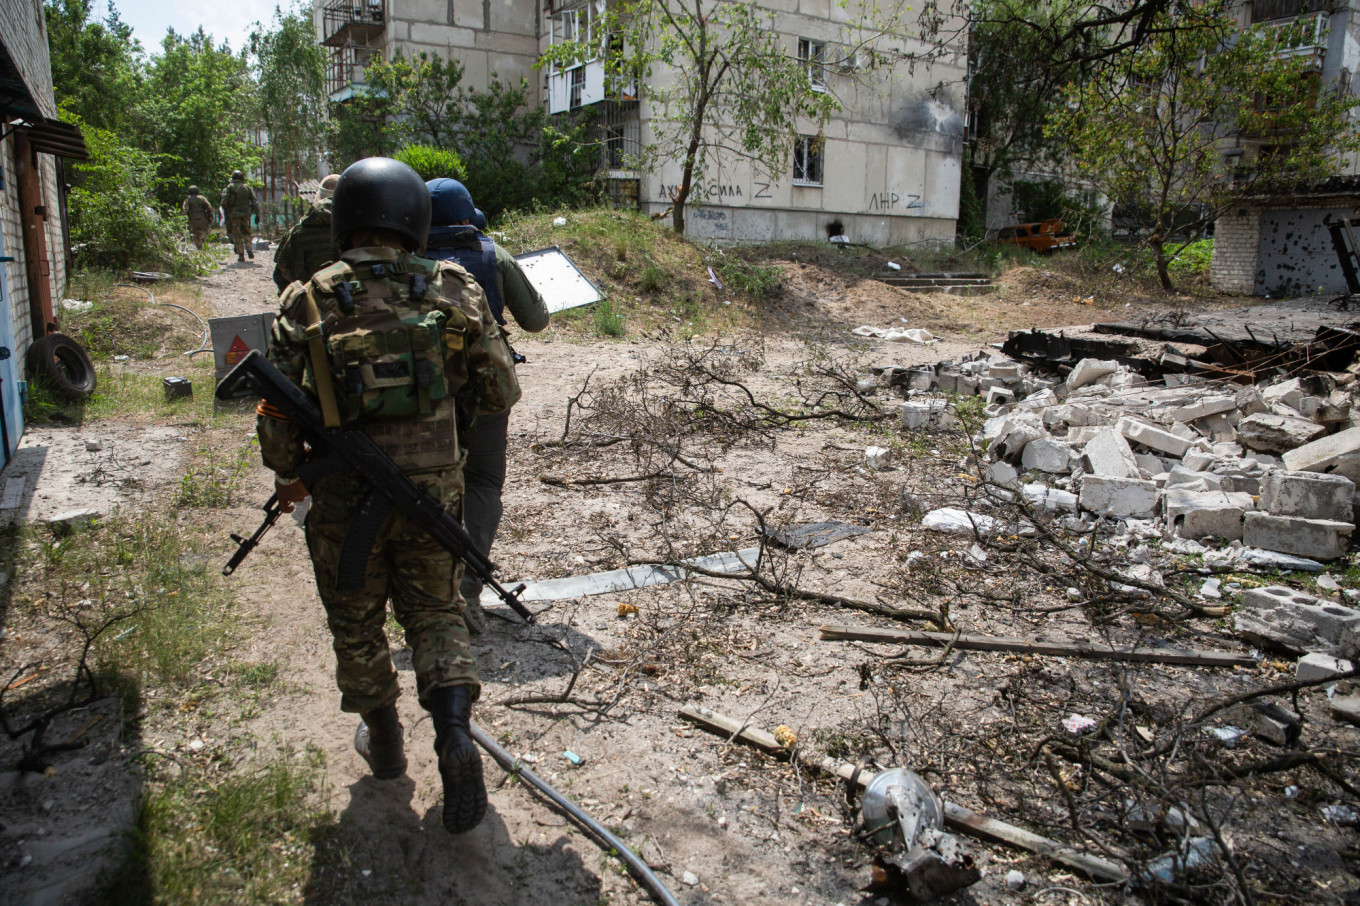 Russians Have Lost Ground in Severodonetsk: Regional Governor